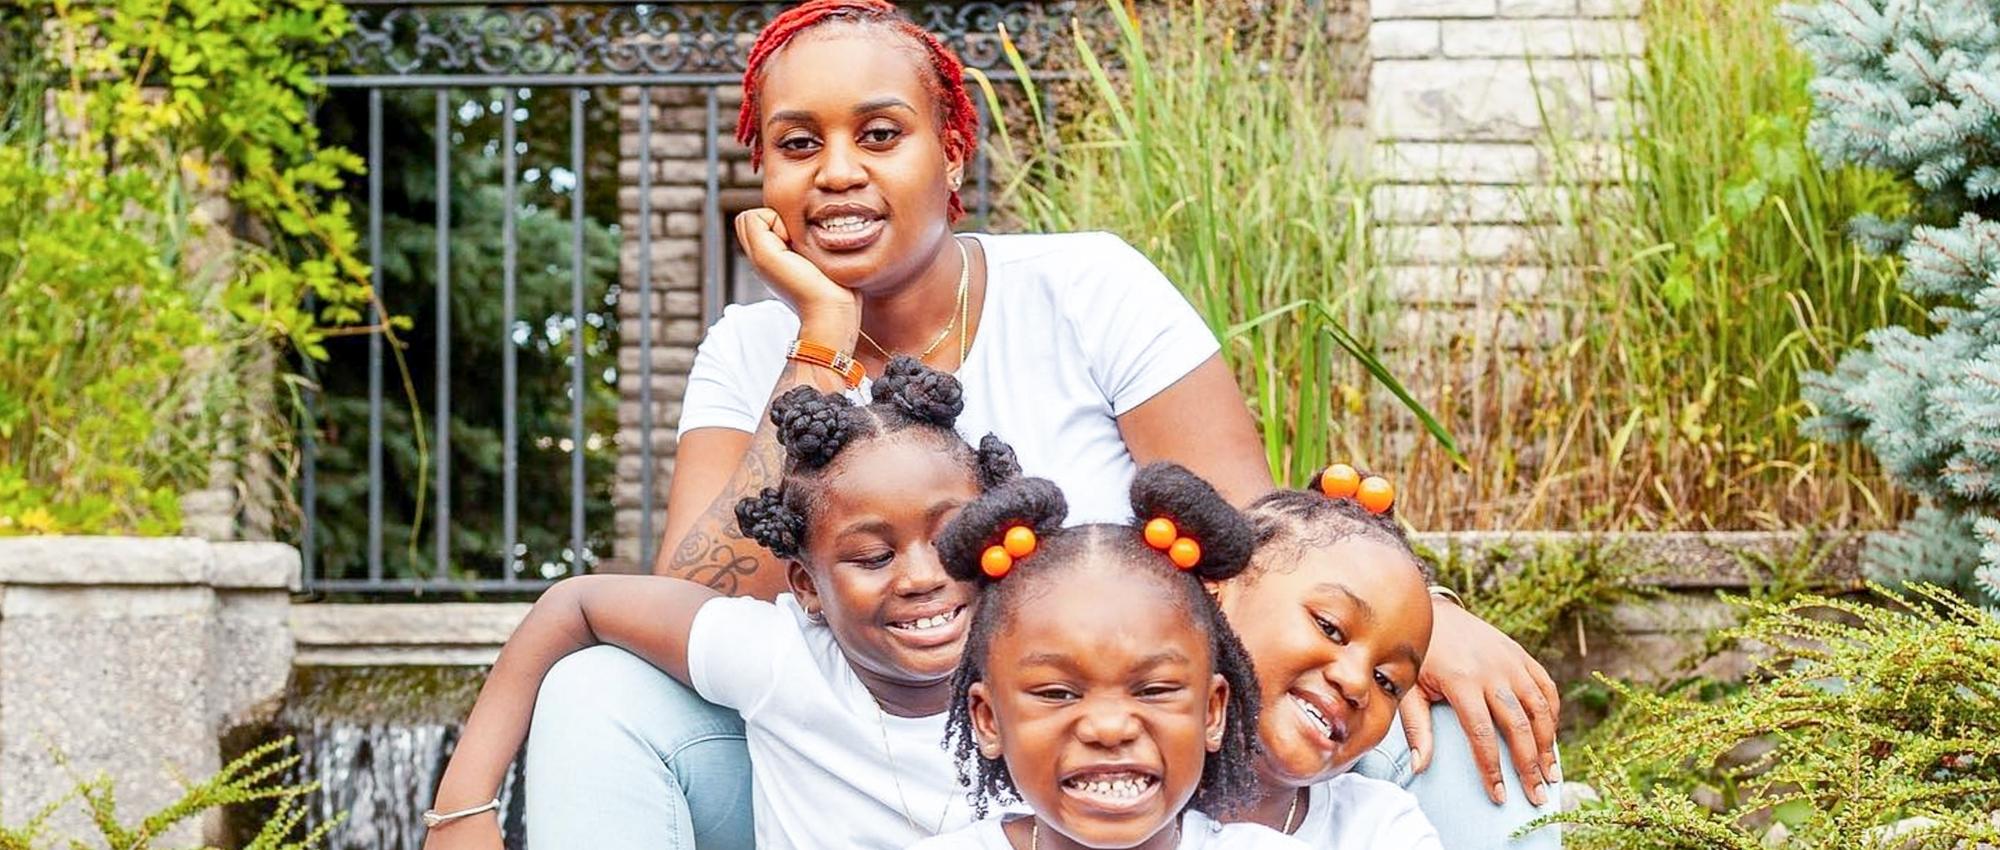 Jamaique Rose poses with her three daughters. Jamaique urgently needs a stem cell transplant. She urges Black Canadians to join the stem cell registry.